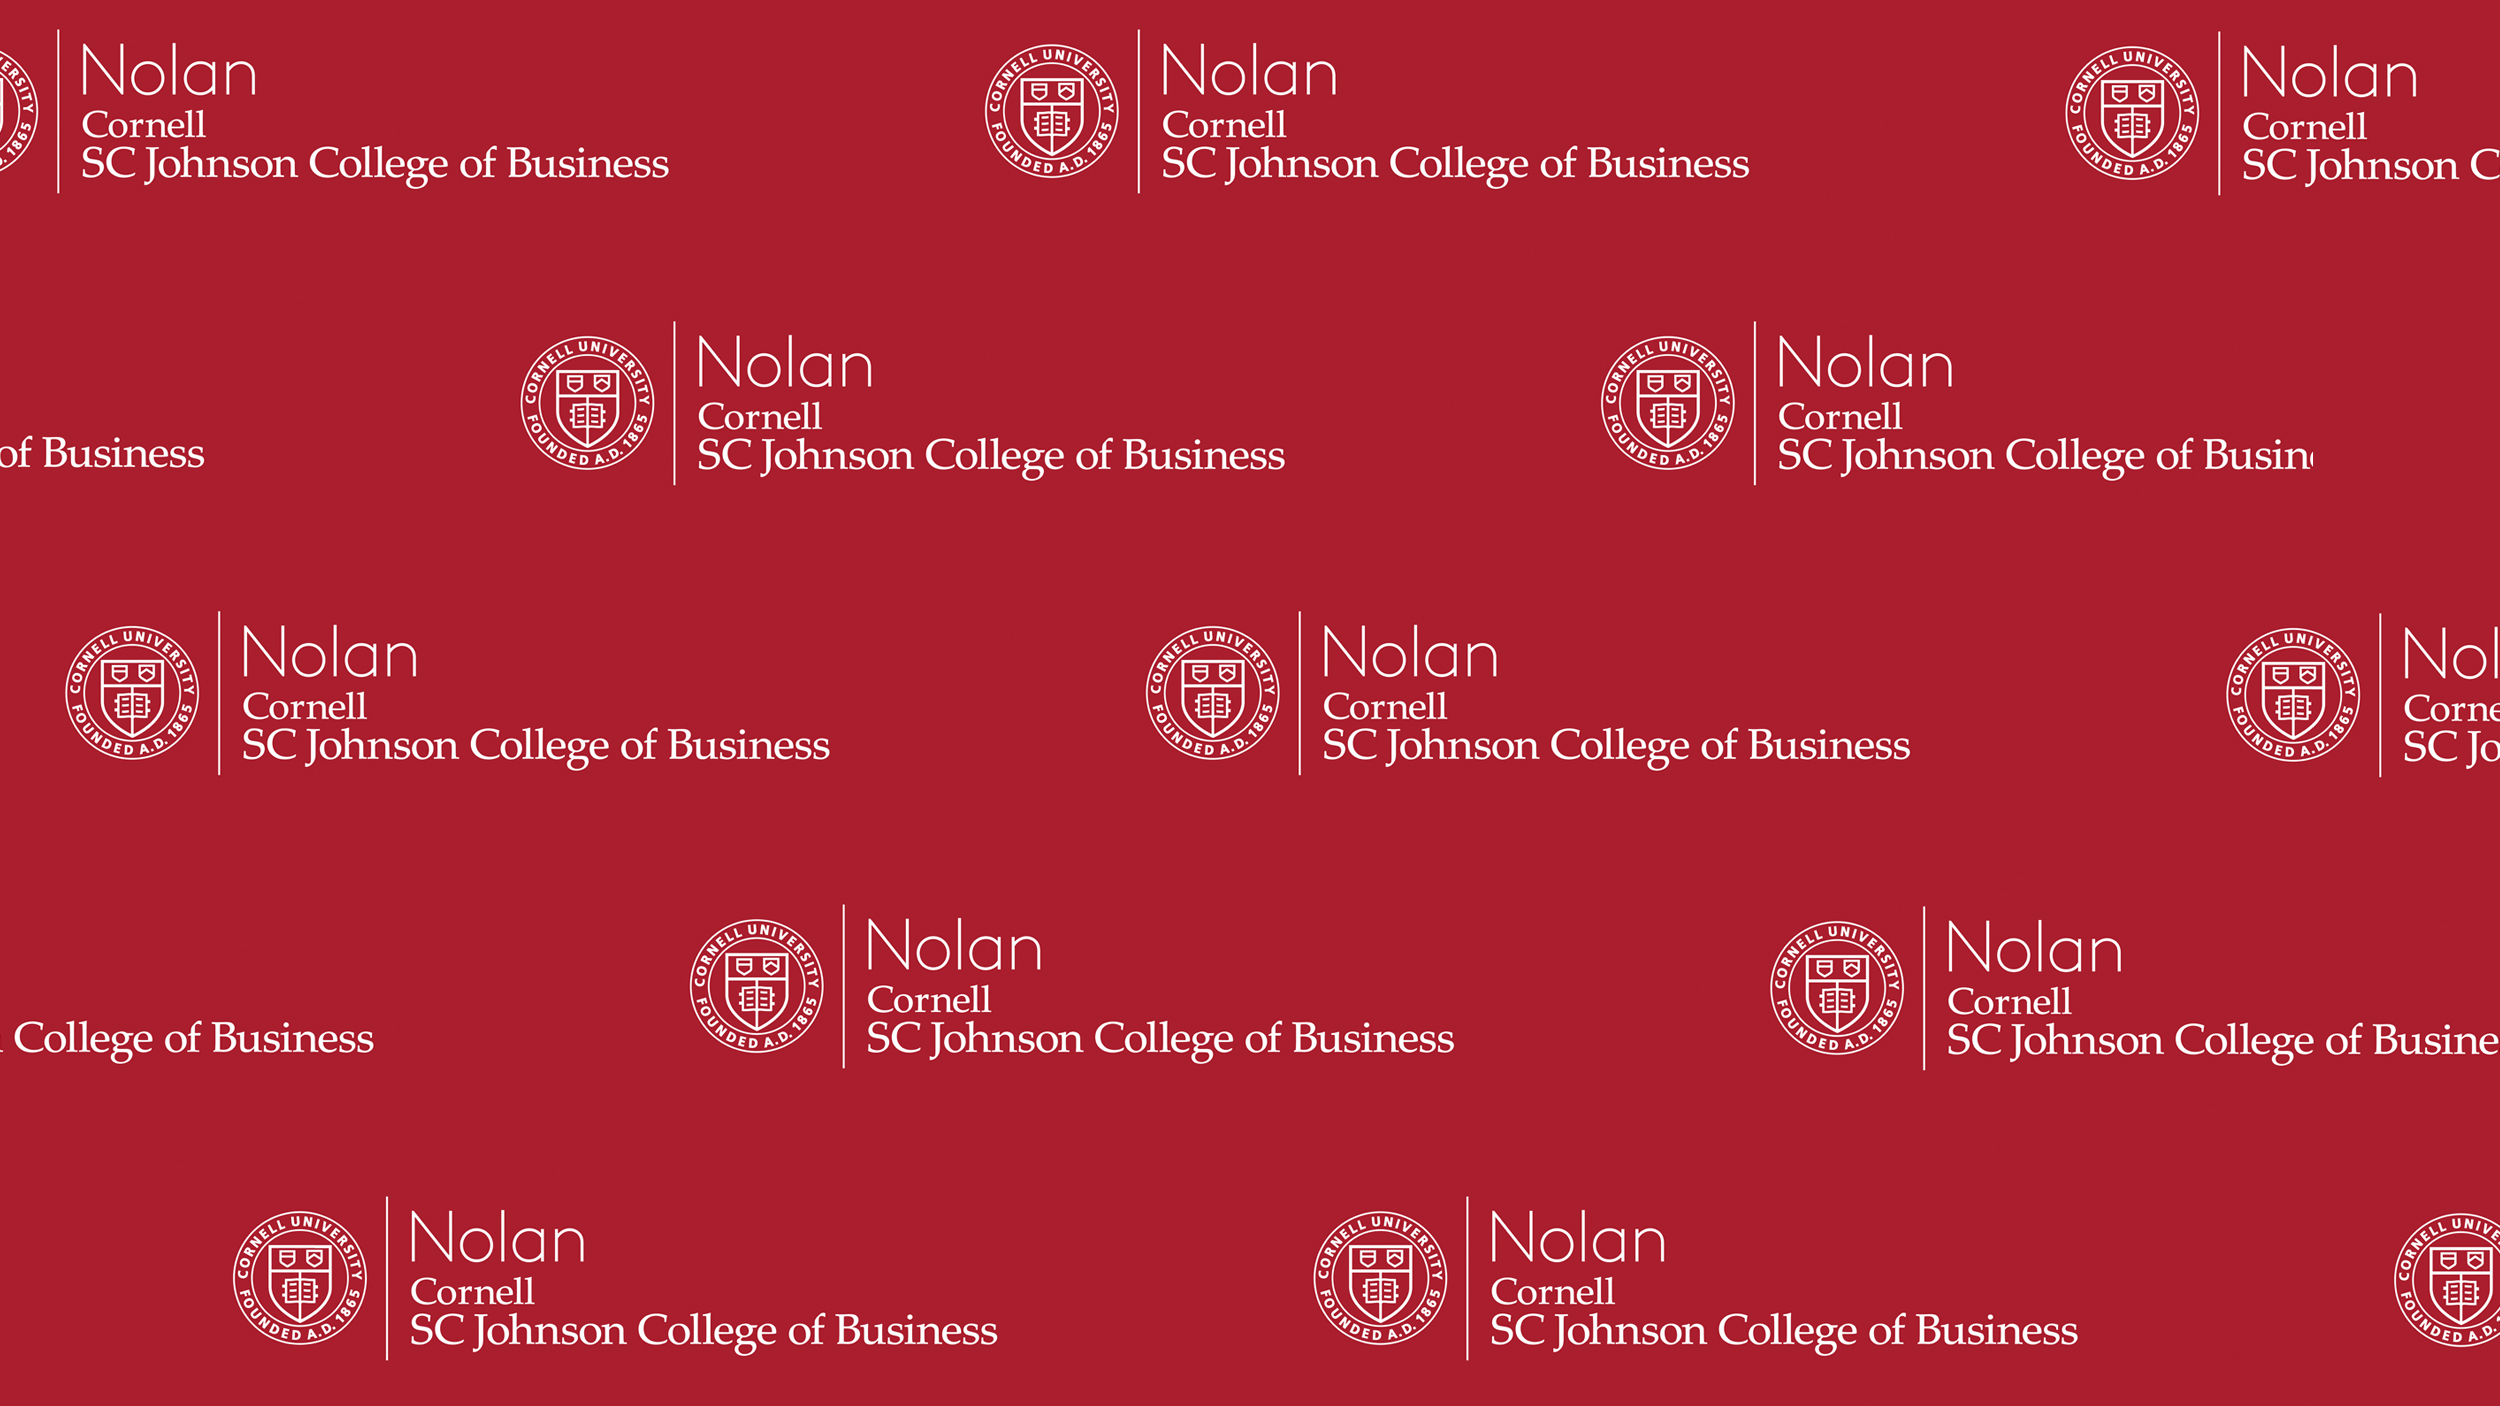 Nolan School logo step and repeat Zoom background